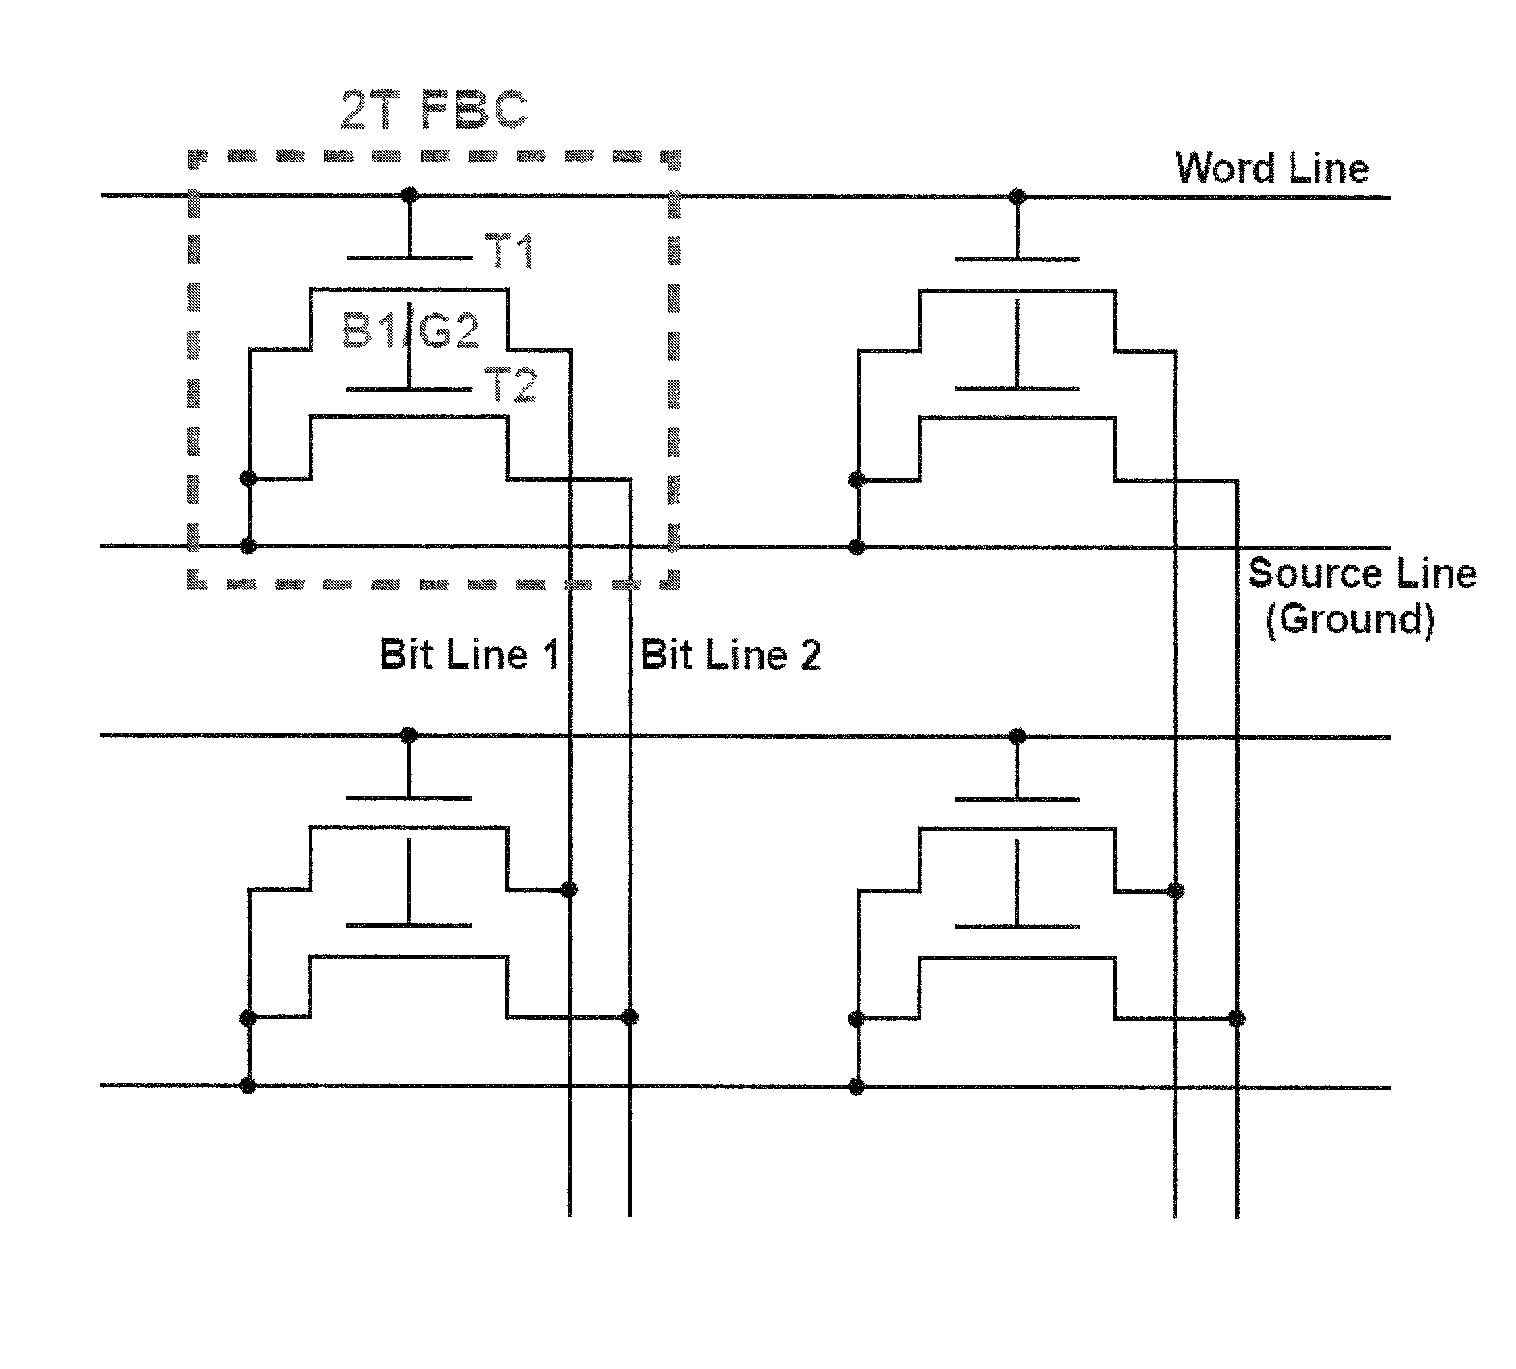 Two-transistor floating-body dynamic memory cell